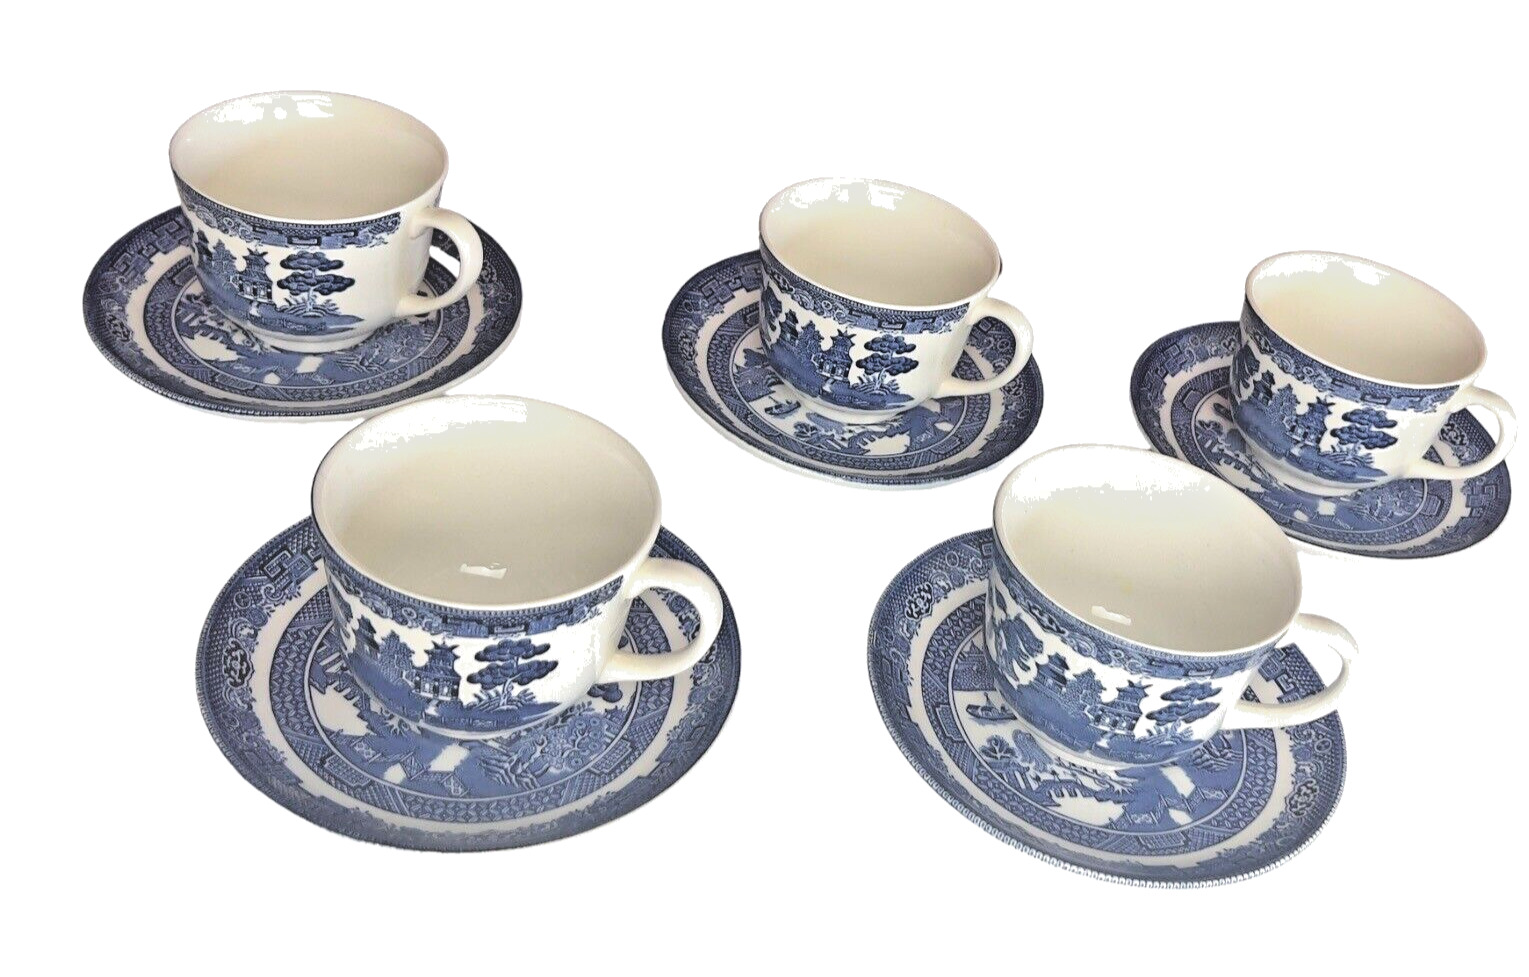 Johnson Brothers Blue Willow Teacups & Saucers England VTG English SET OF FIVE